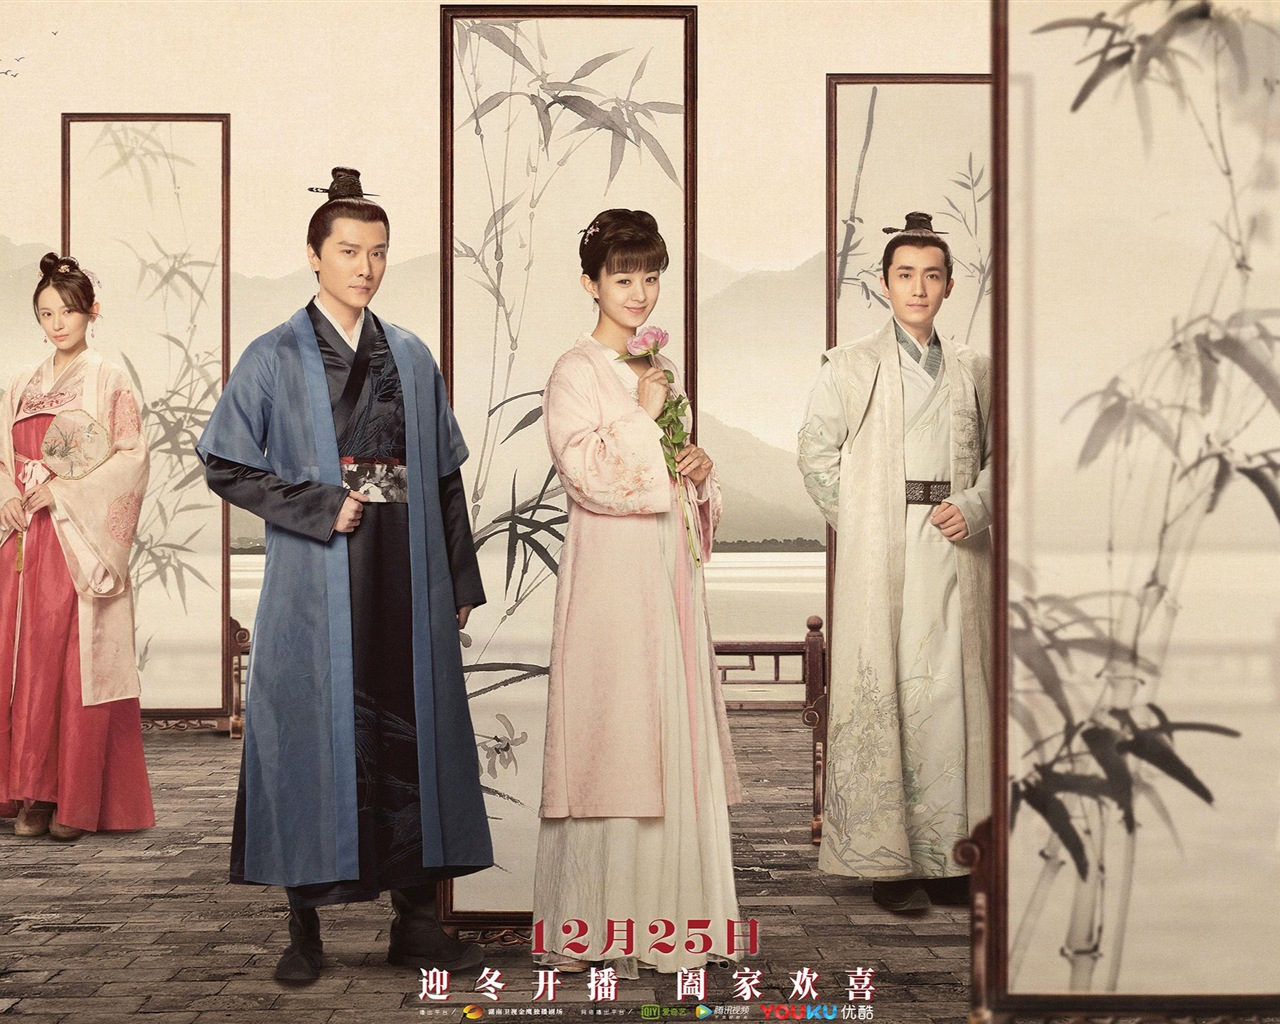 The Story Of MingLan, TV series HD wallpapers #35 - 1280x1024